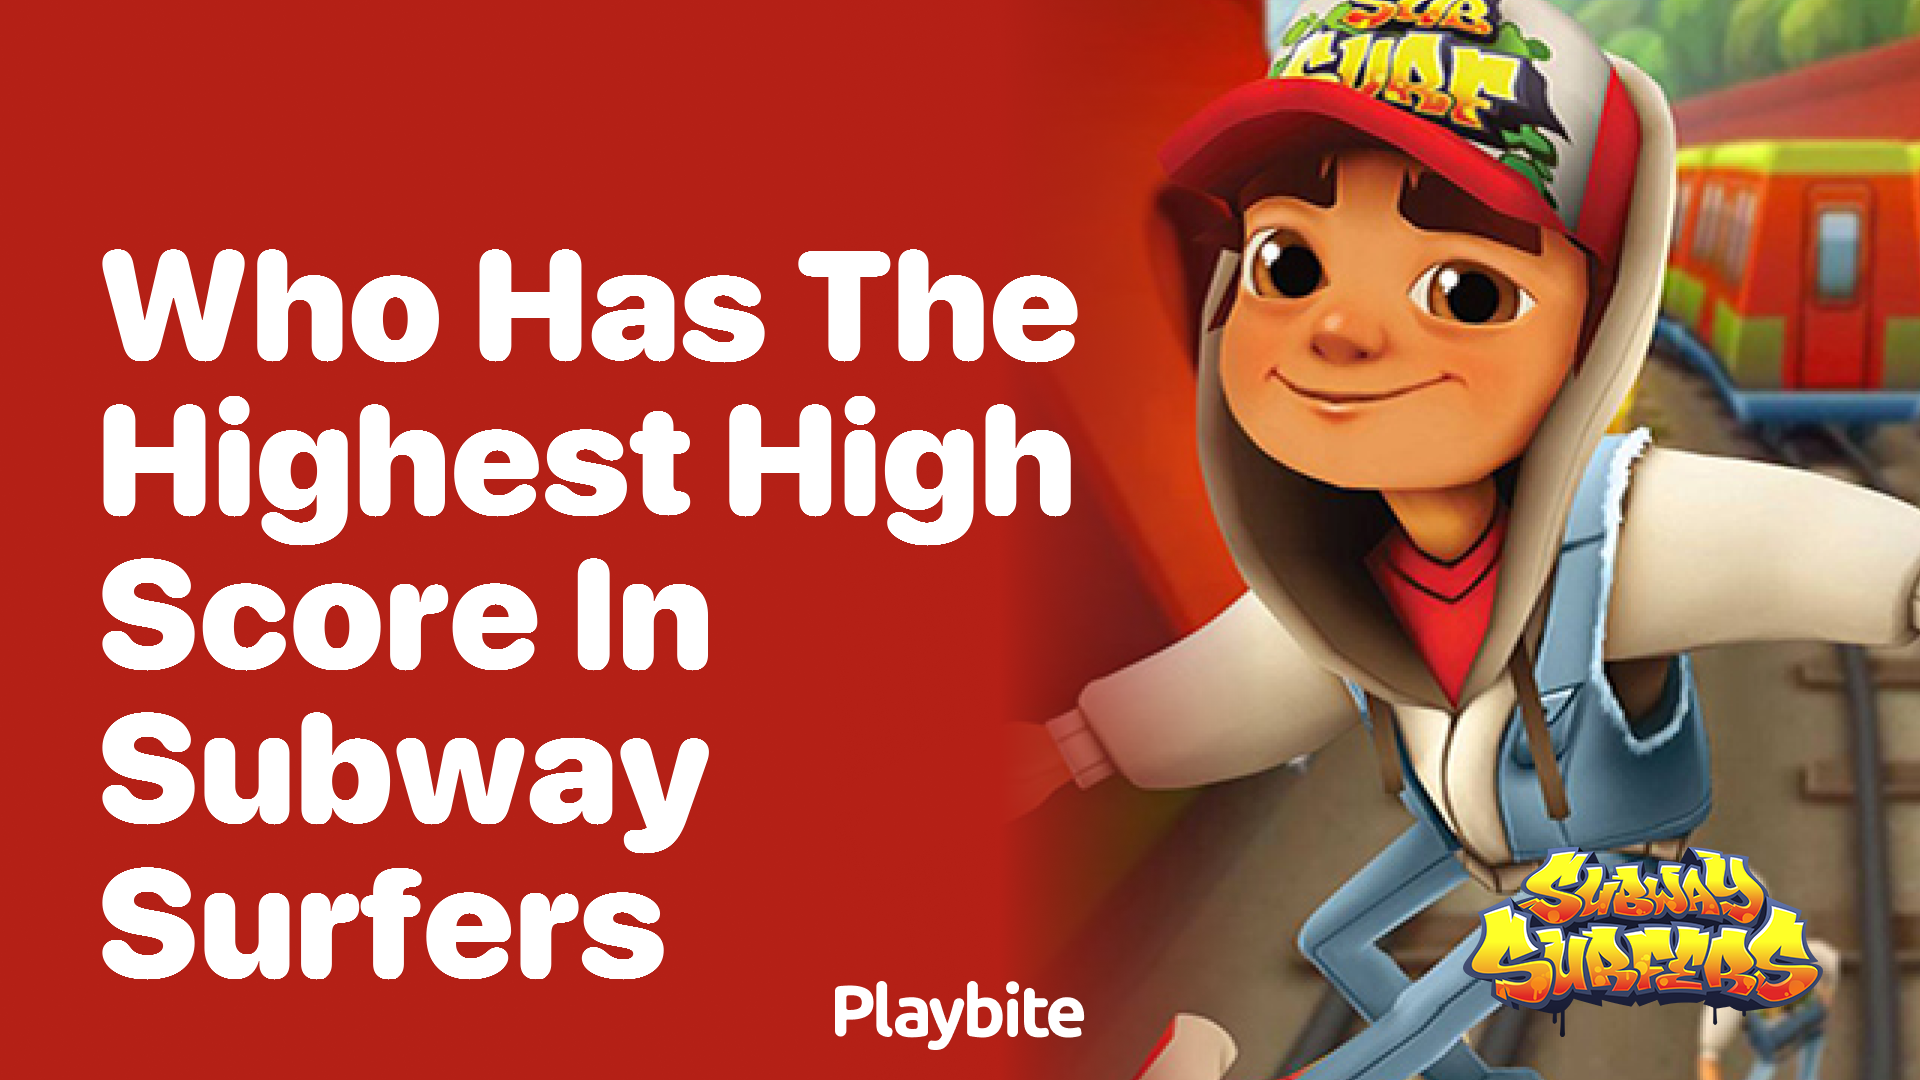 Who has the highest high score in Subway Surfers?